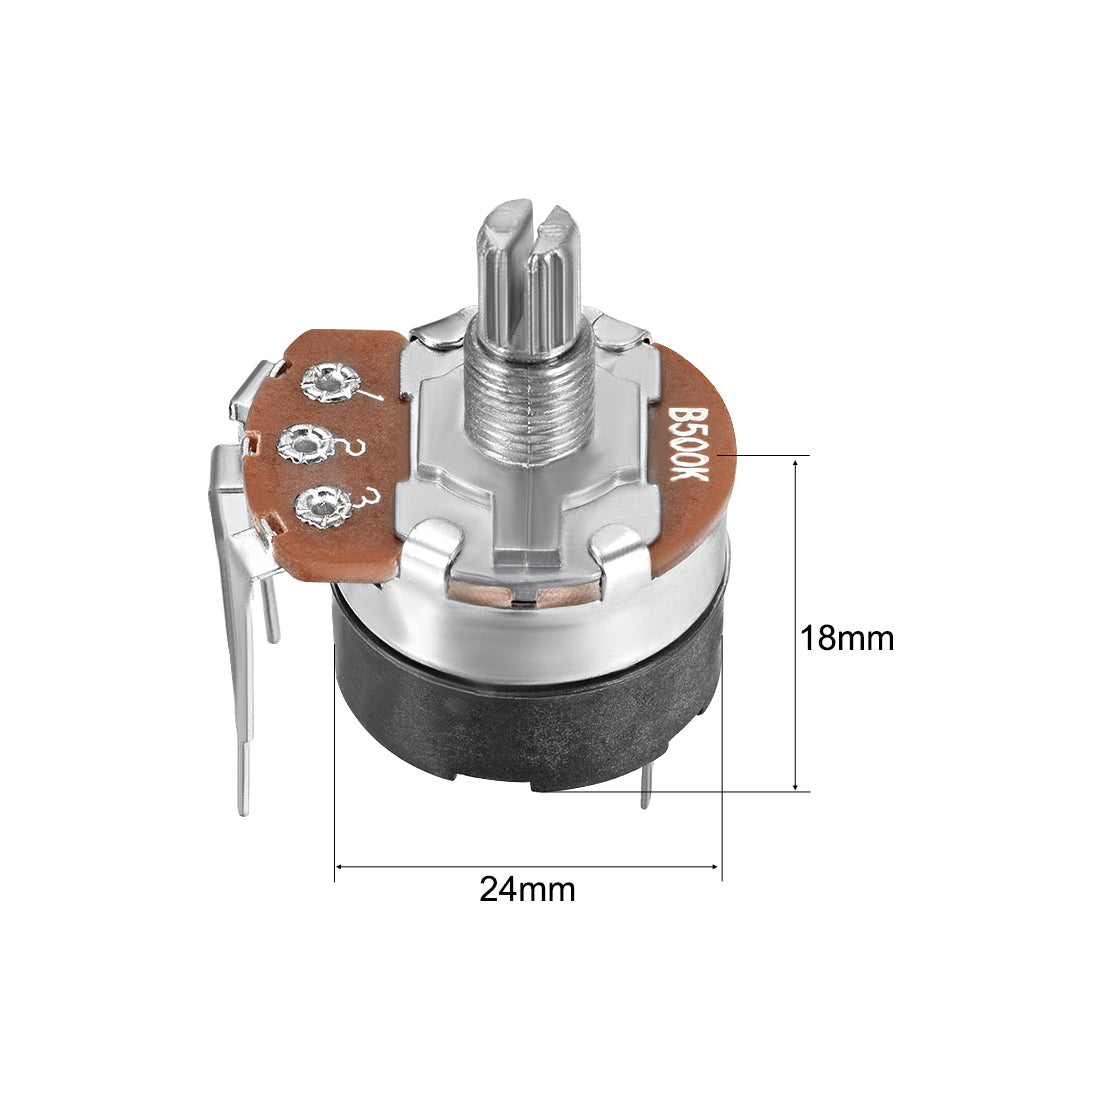 uxcell Uxcell WH138 Potentiometer with Switch 500K Ohm Variable Resistors Single Turn Rotary Carbon Film Taper 10pcs